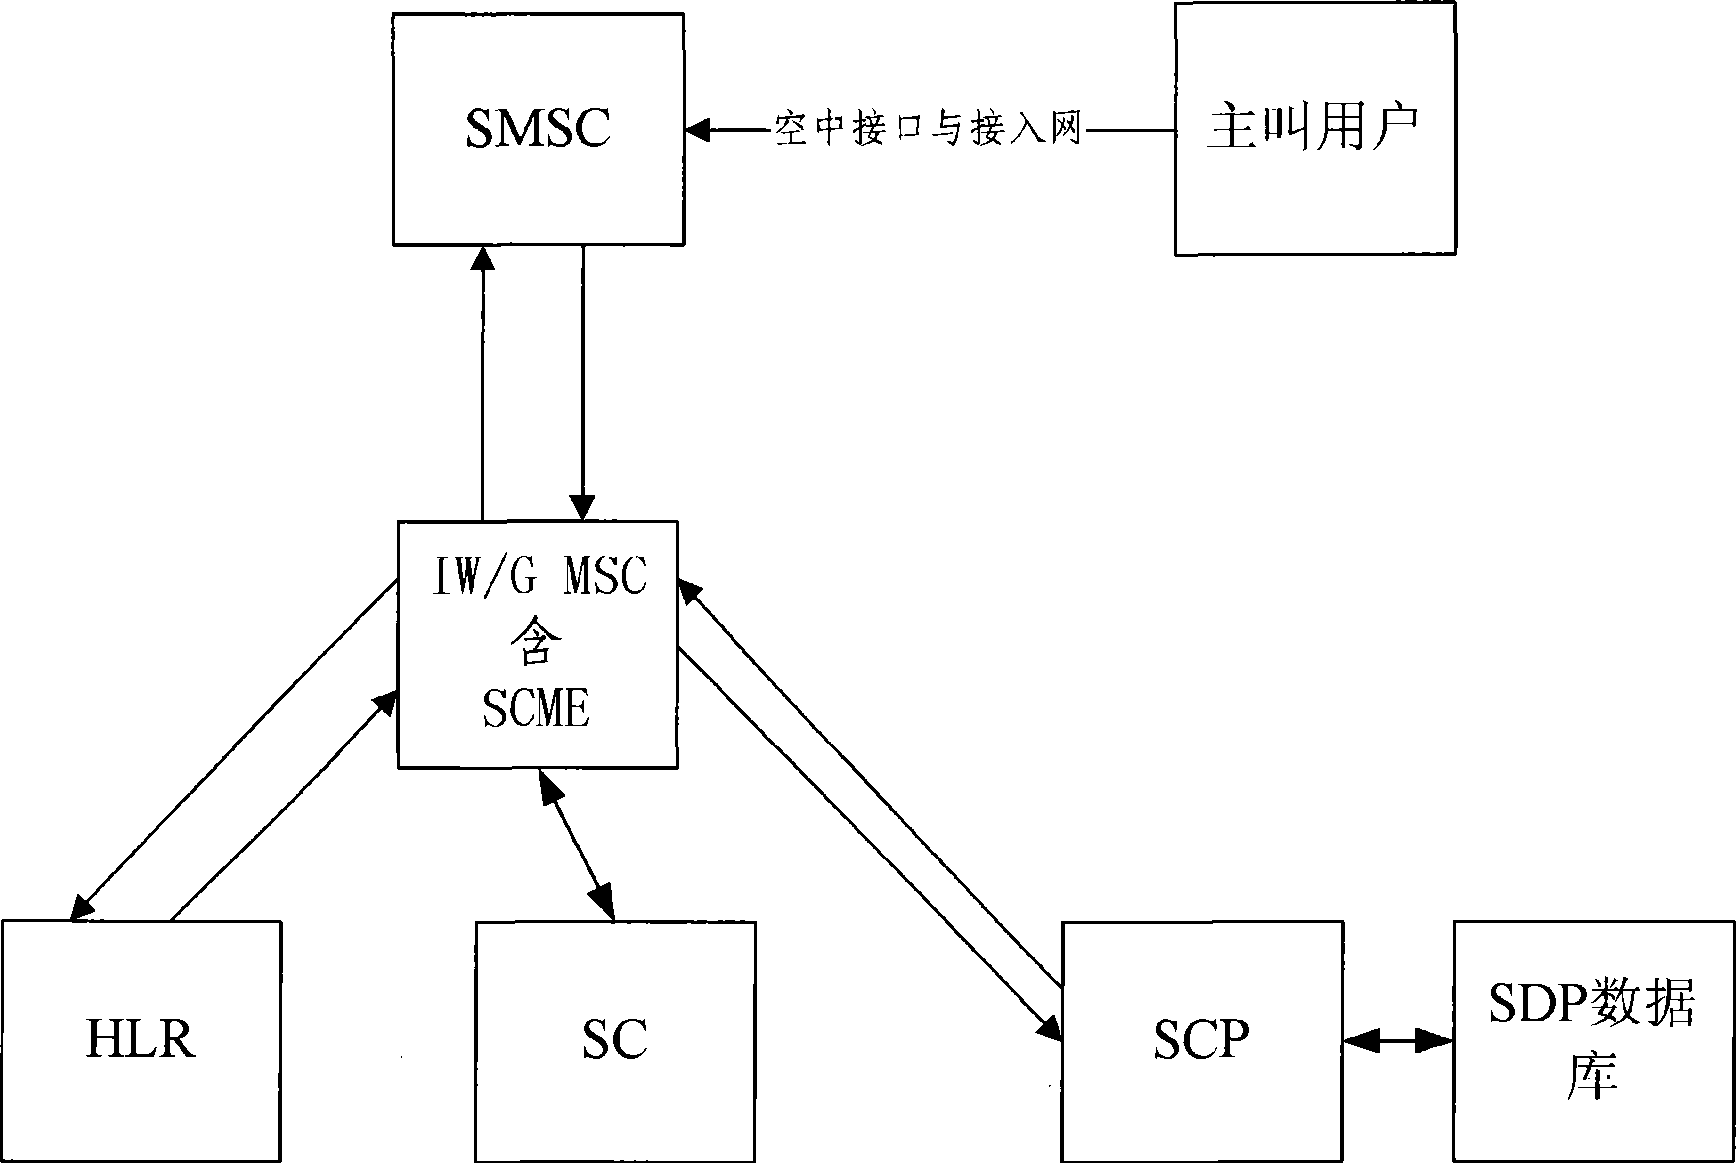 Method for authenticating short message service